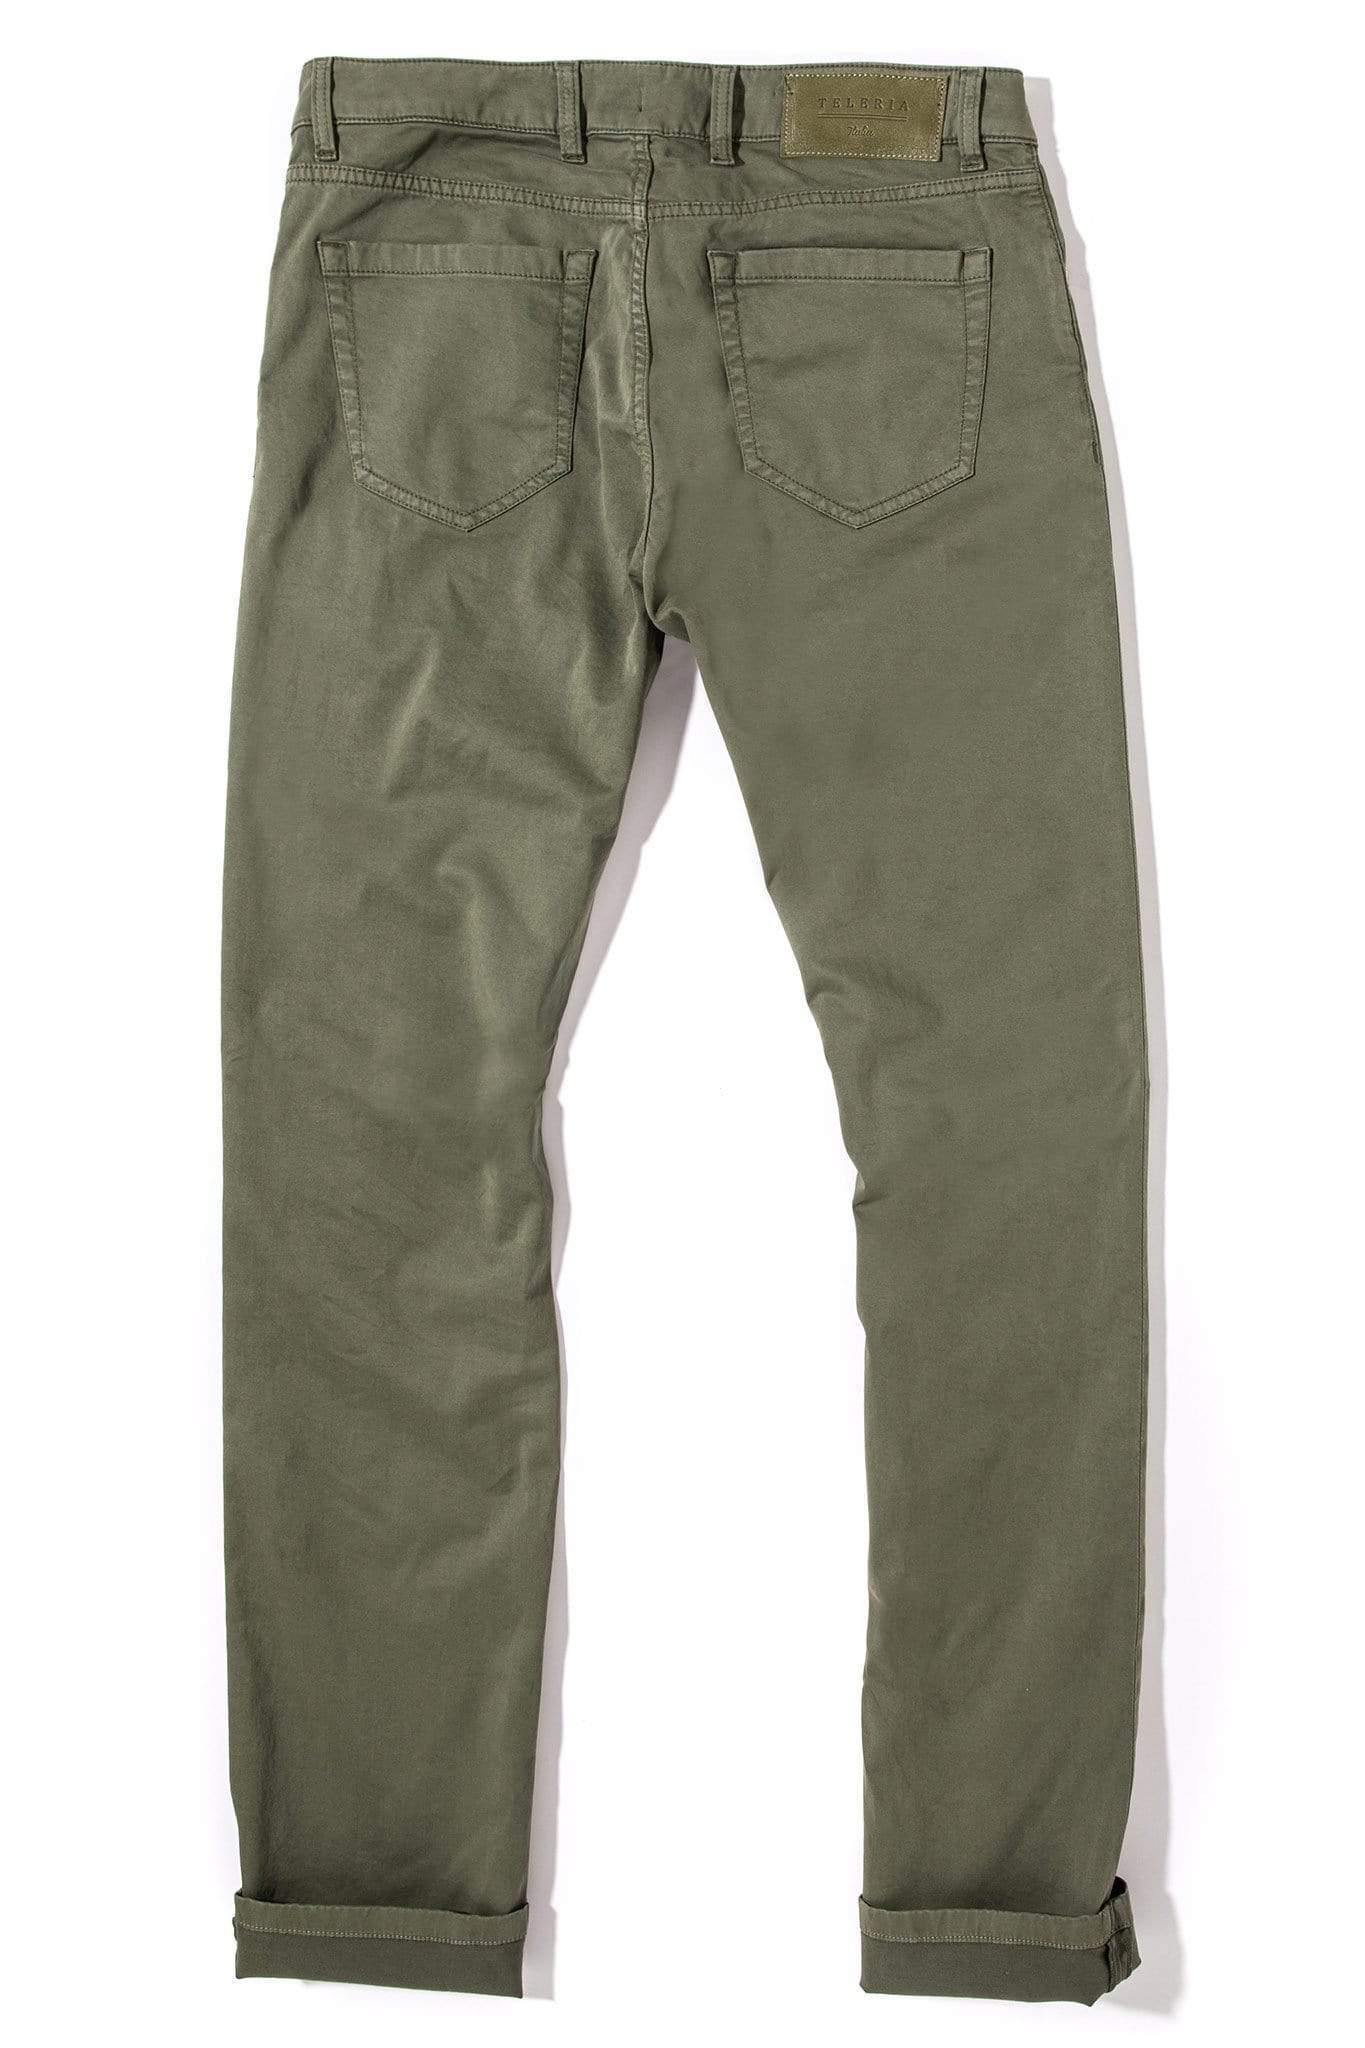 Yuma Soft Touch In Army | Mens - Pants - 5 Pocket | Teleria Zed